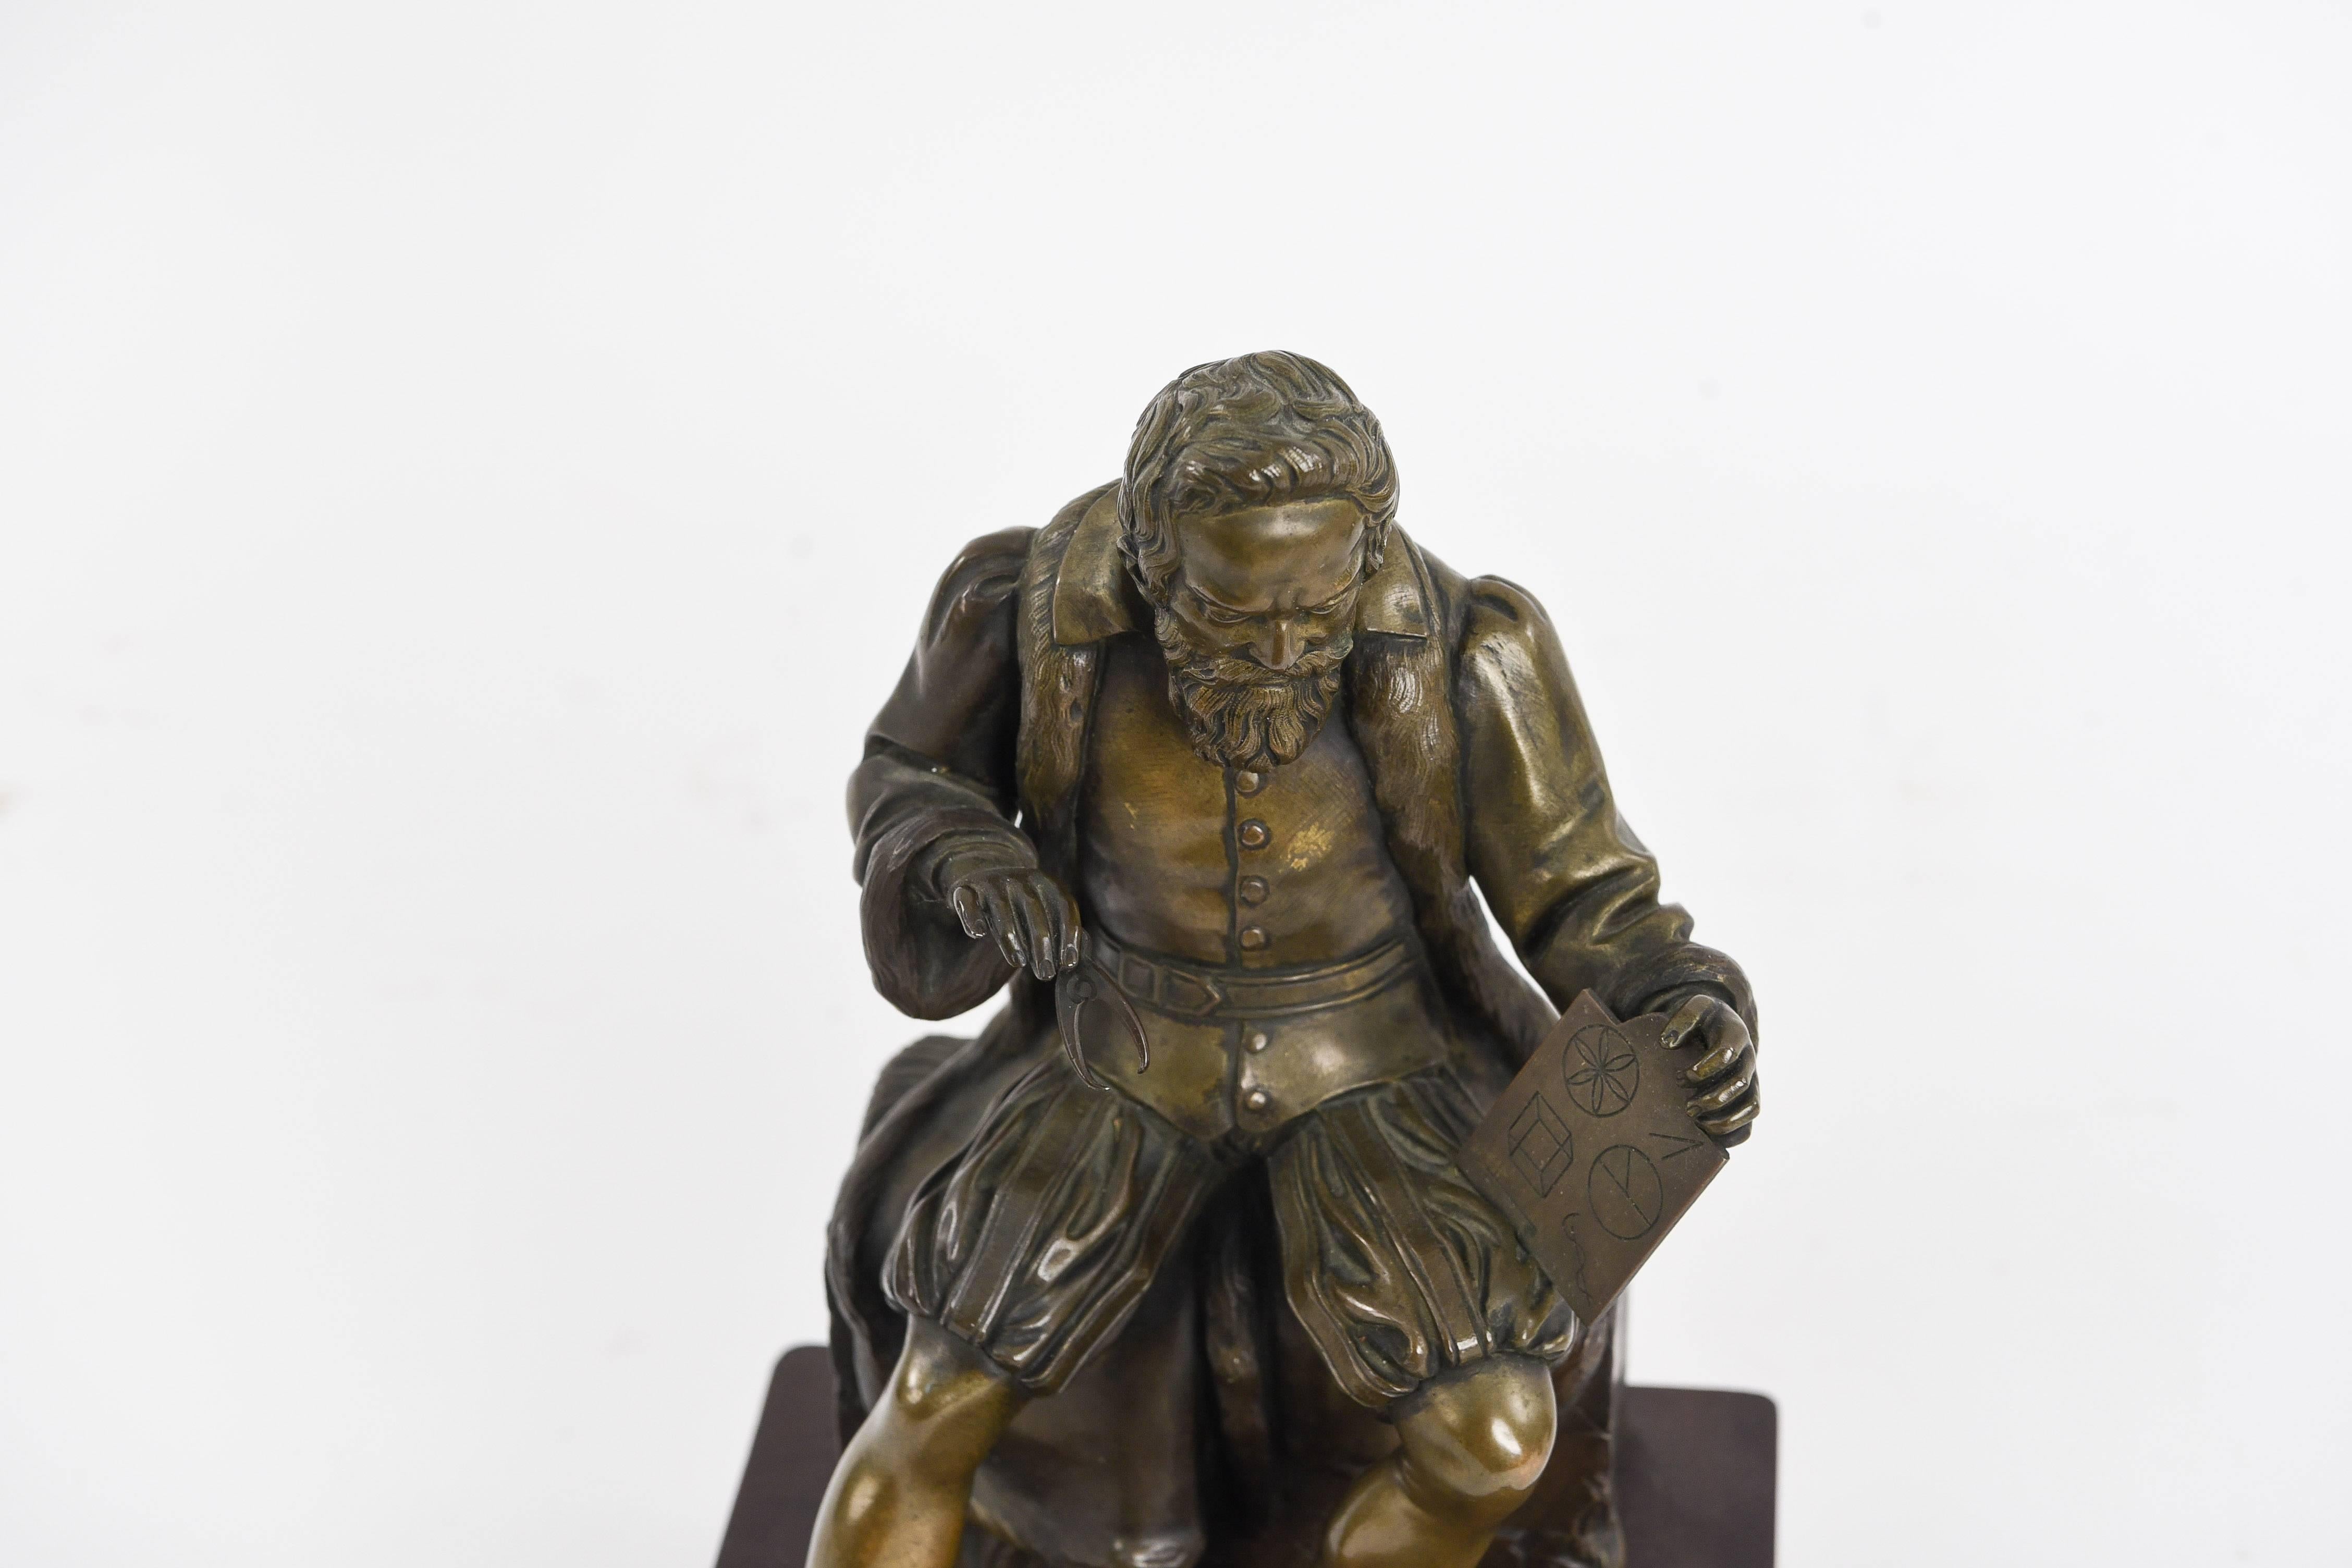 This French bronze is signed illegibly and marked Paris to the back. It depicts a mathematician, as shown with his tools. This well crafted piece sits upon a wooden base with green felt underneath. Very beautiful sculptural detail in the clothing